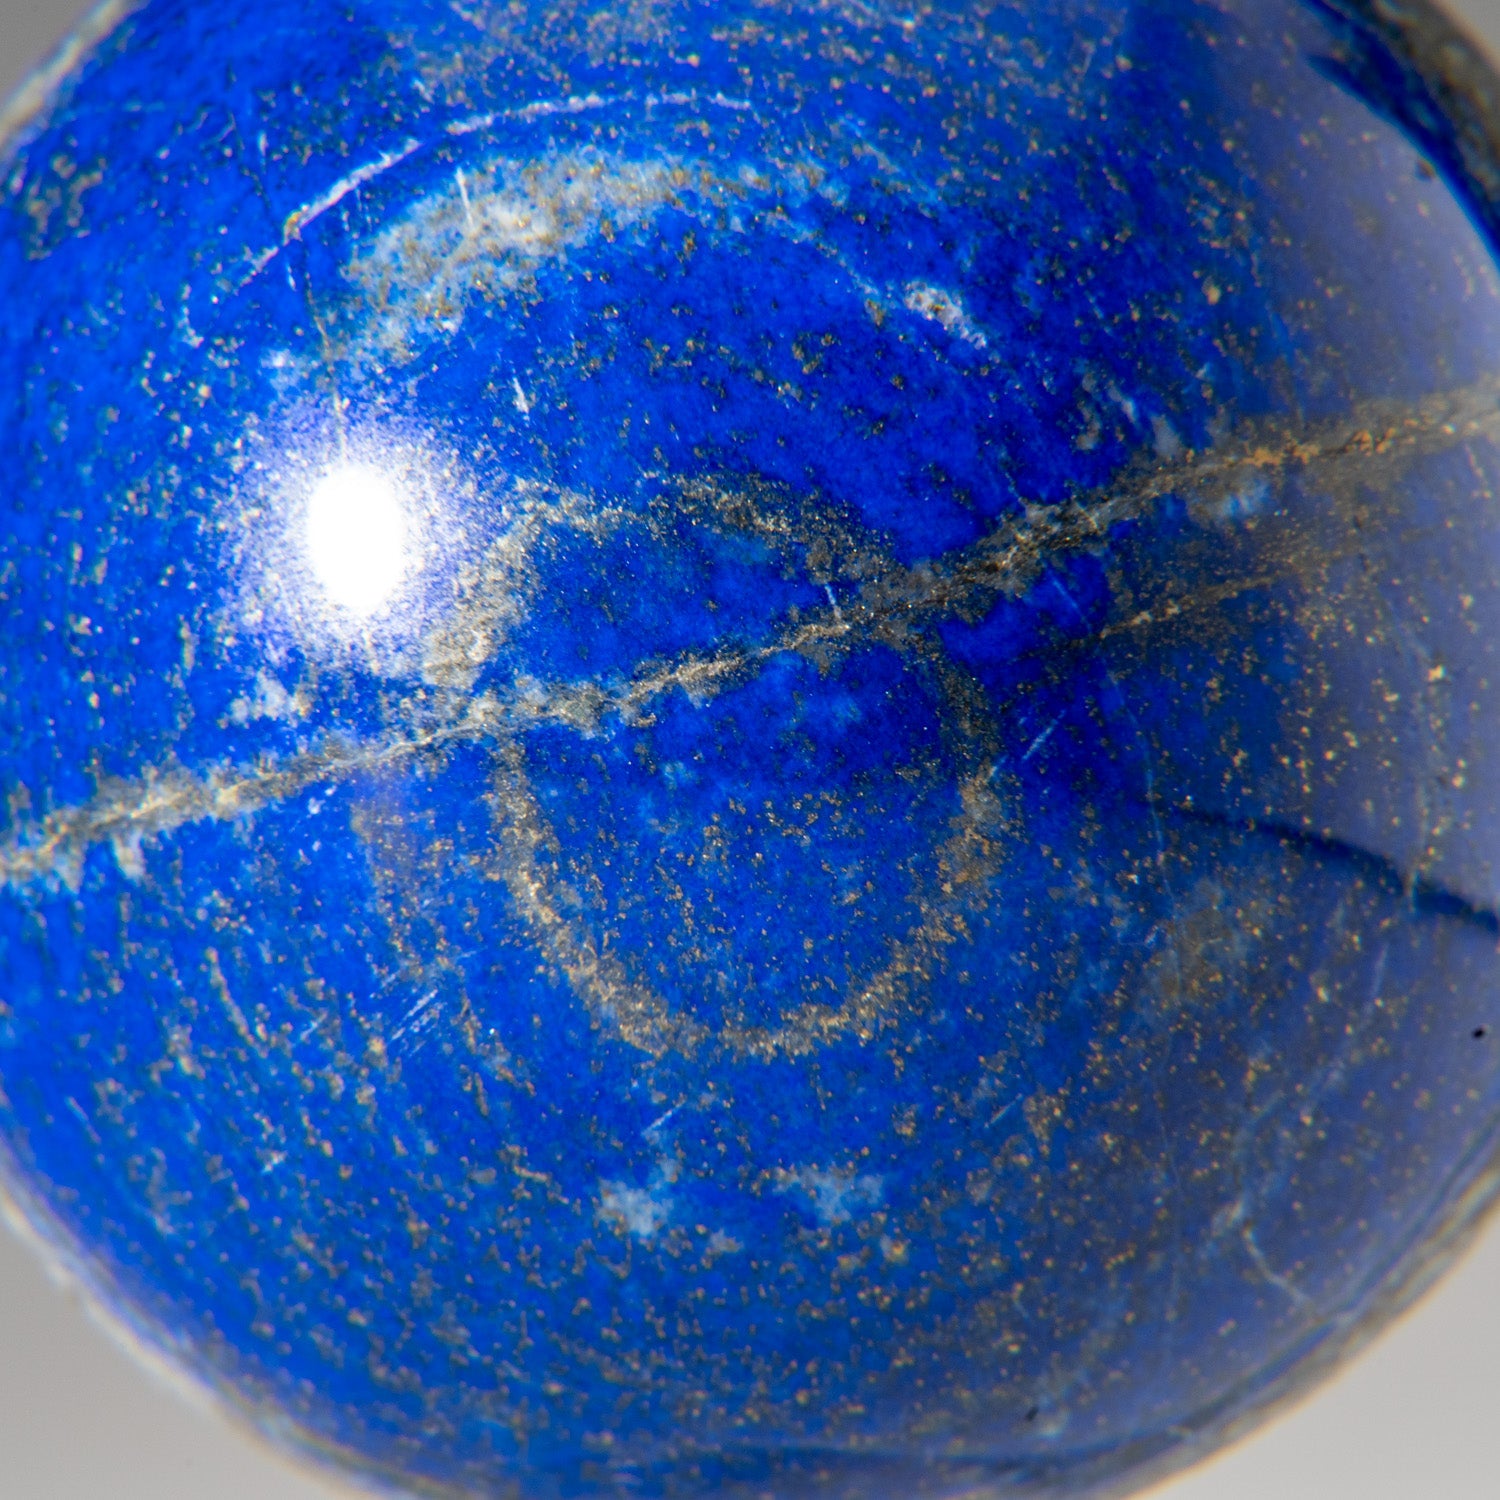 Genuine Polished Lapis Lazuli (3.25") Sphere from Afghanistan